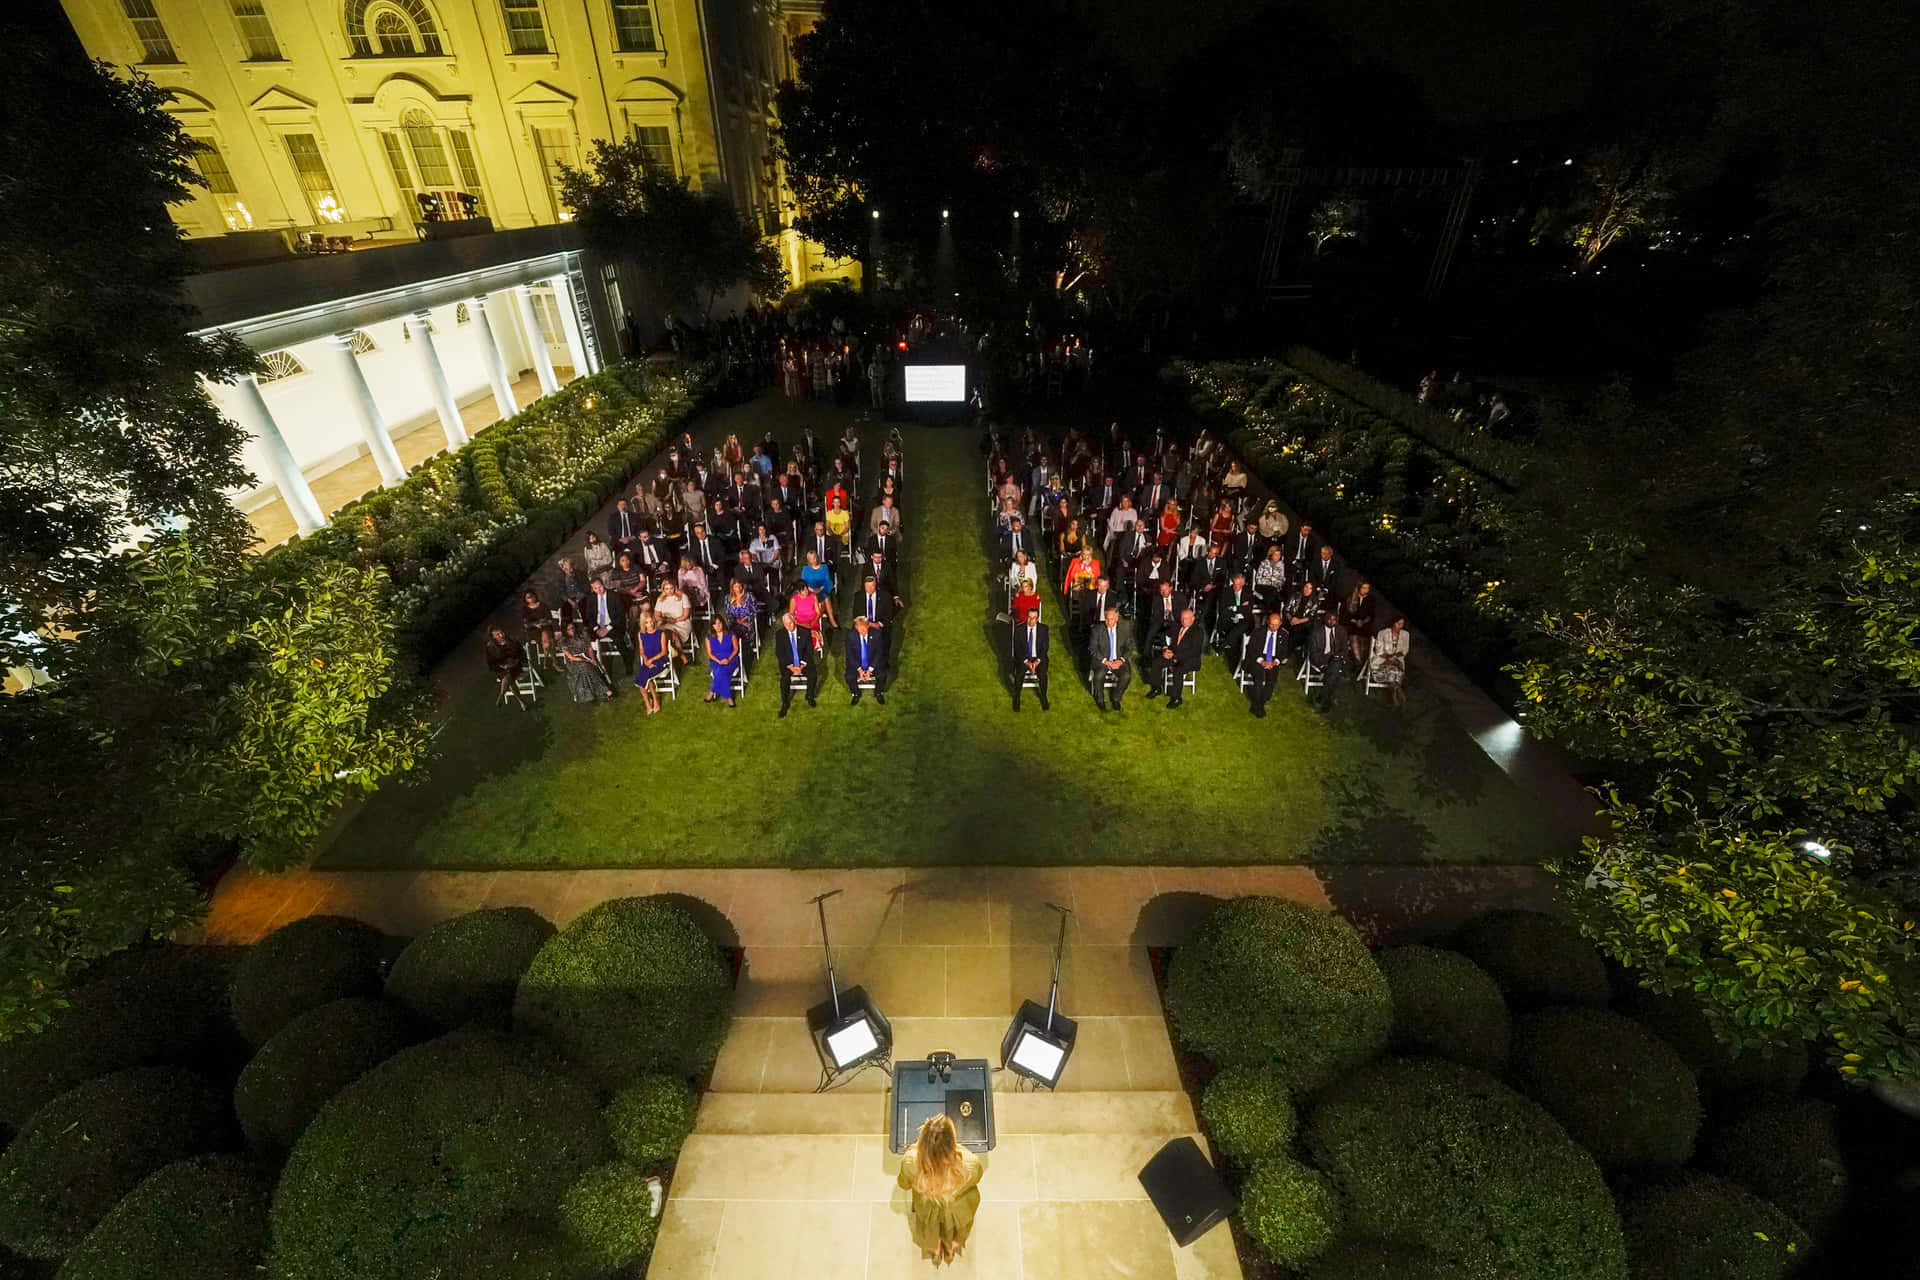 A Crowd Of People Standing In A Garden At Night